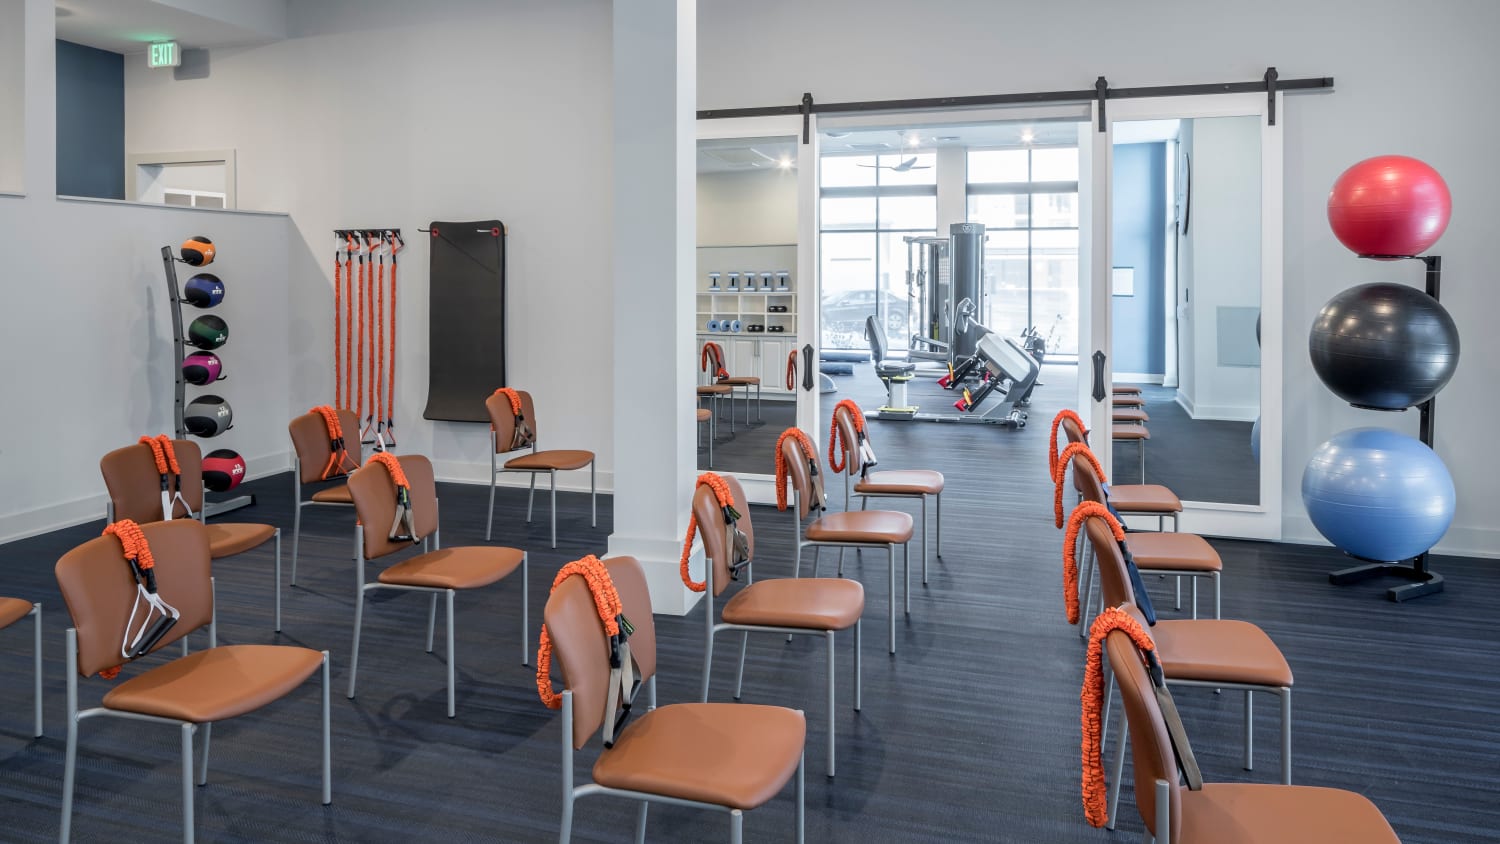 group exercise room